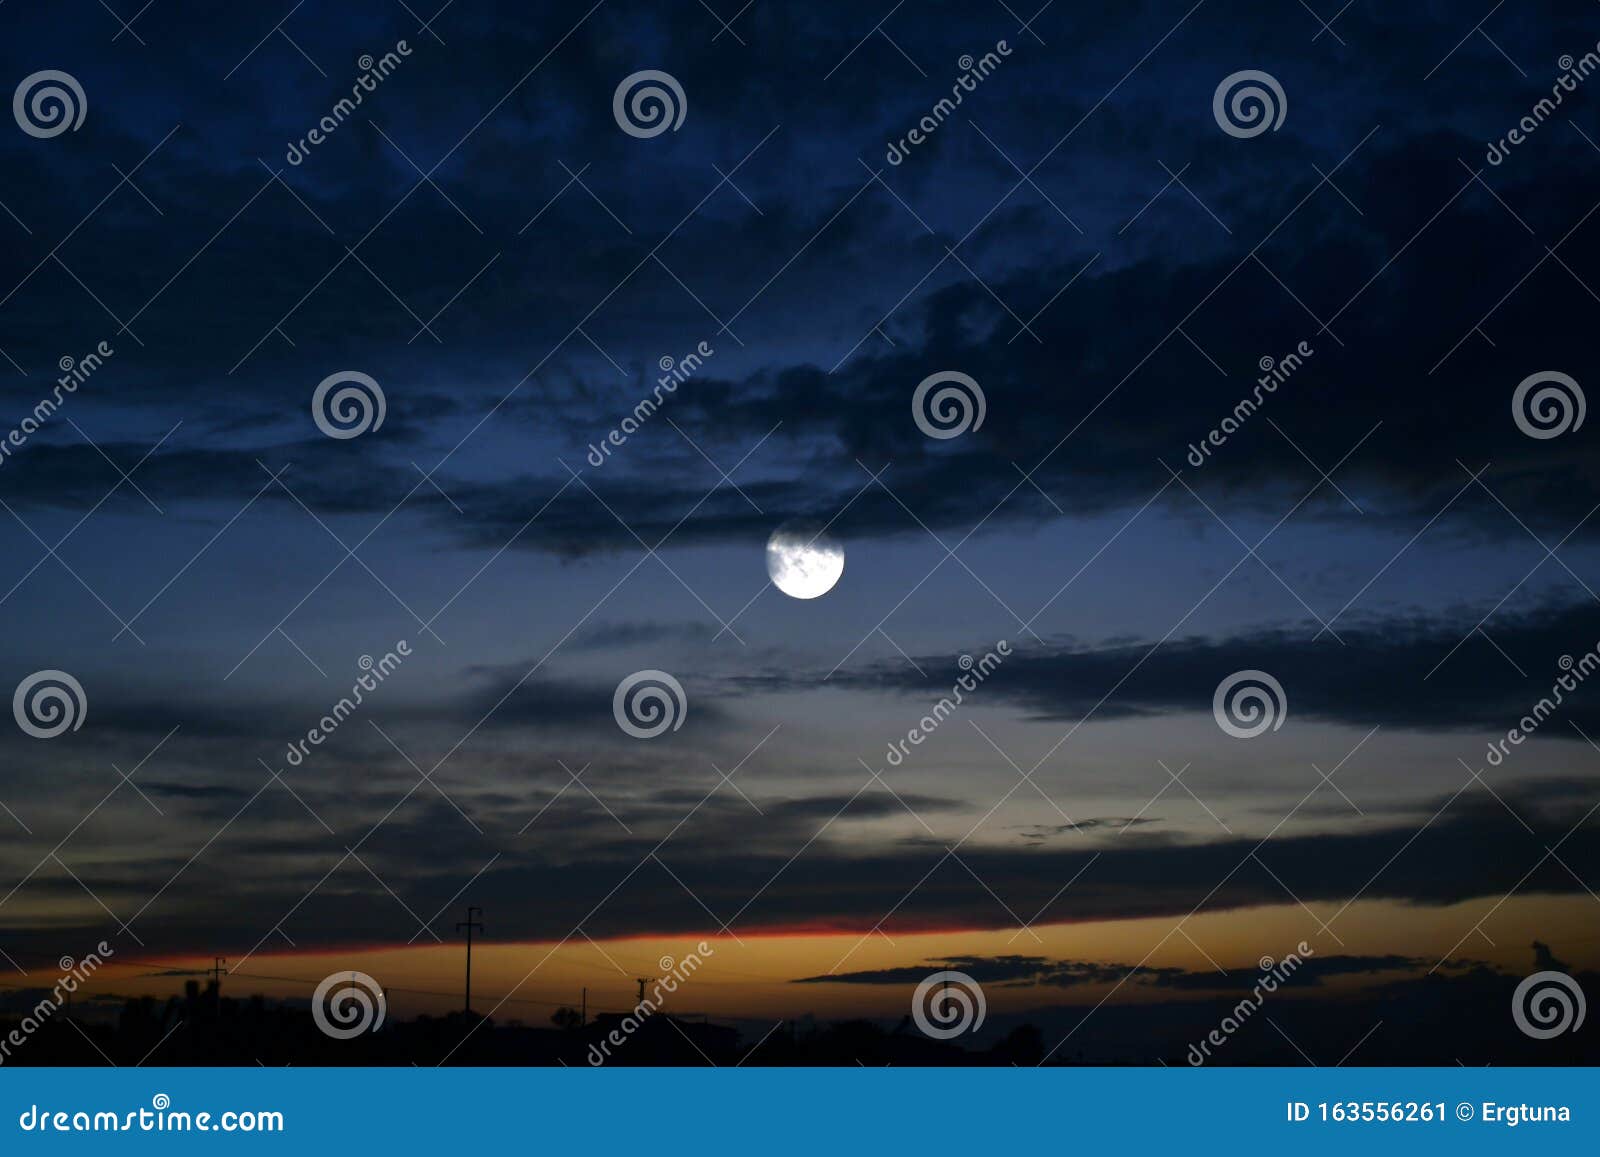 the moon obscured by clouds in the autumn evening sky, Sky with abstract colors, abstract natural background